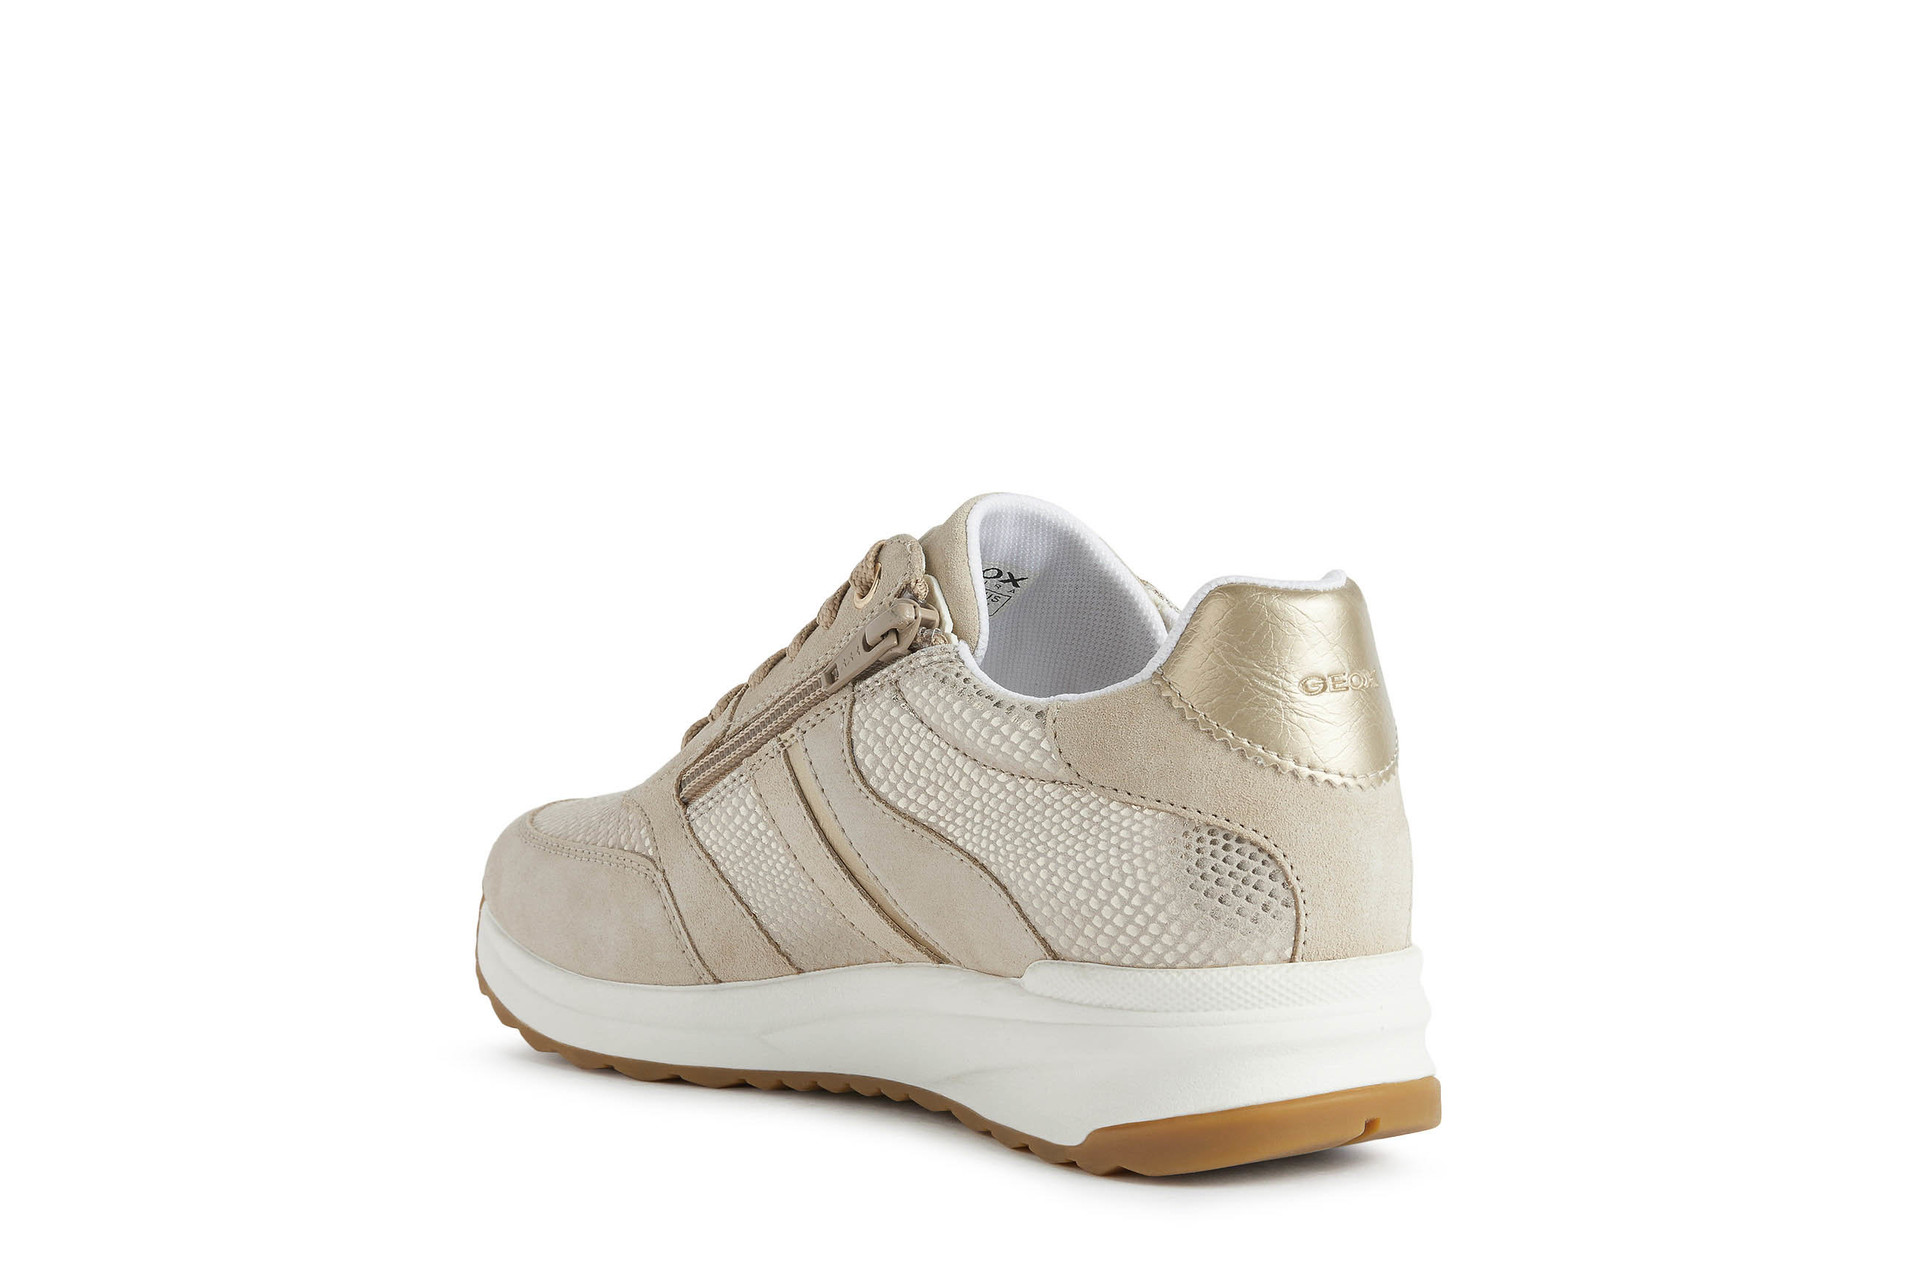 GEOX Airell - Beige suede leather